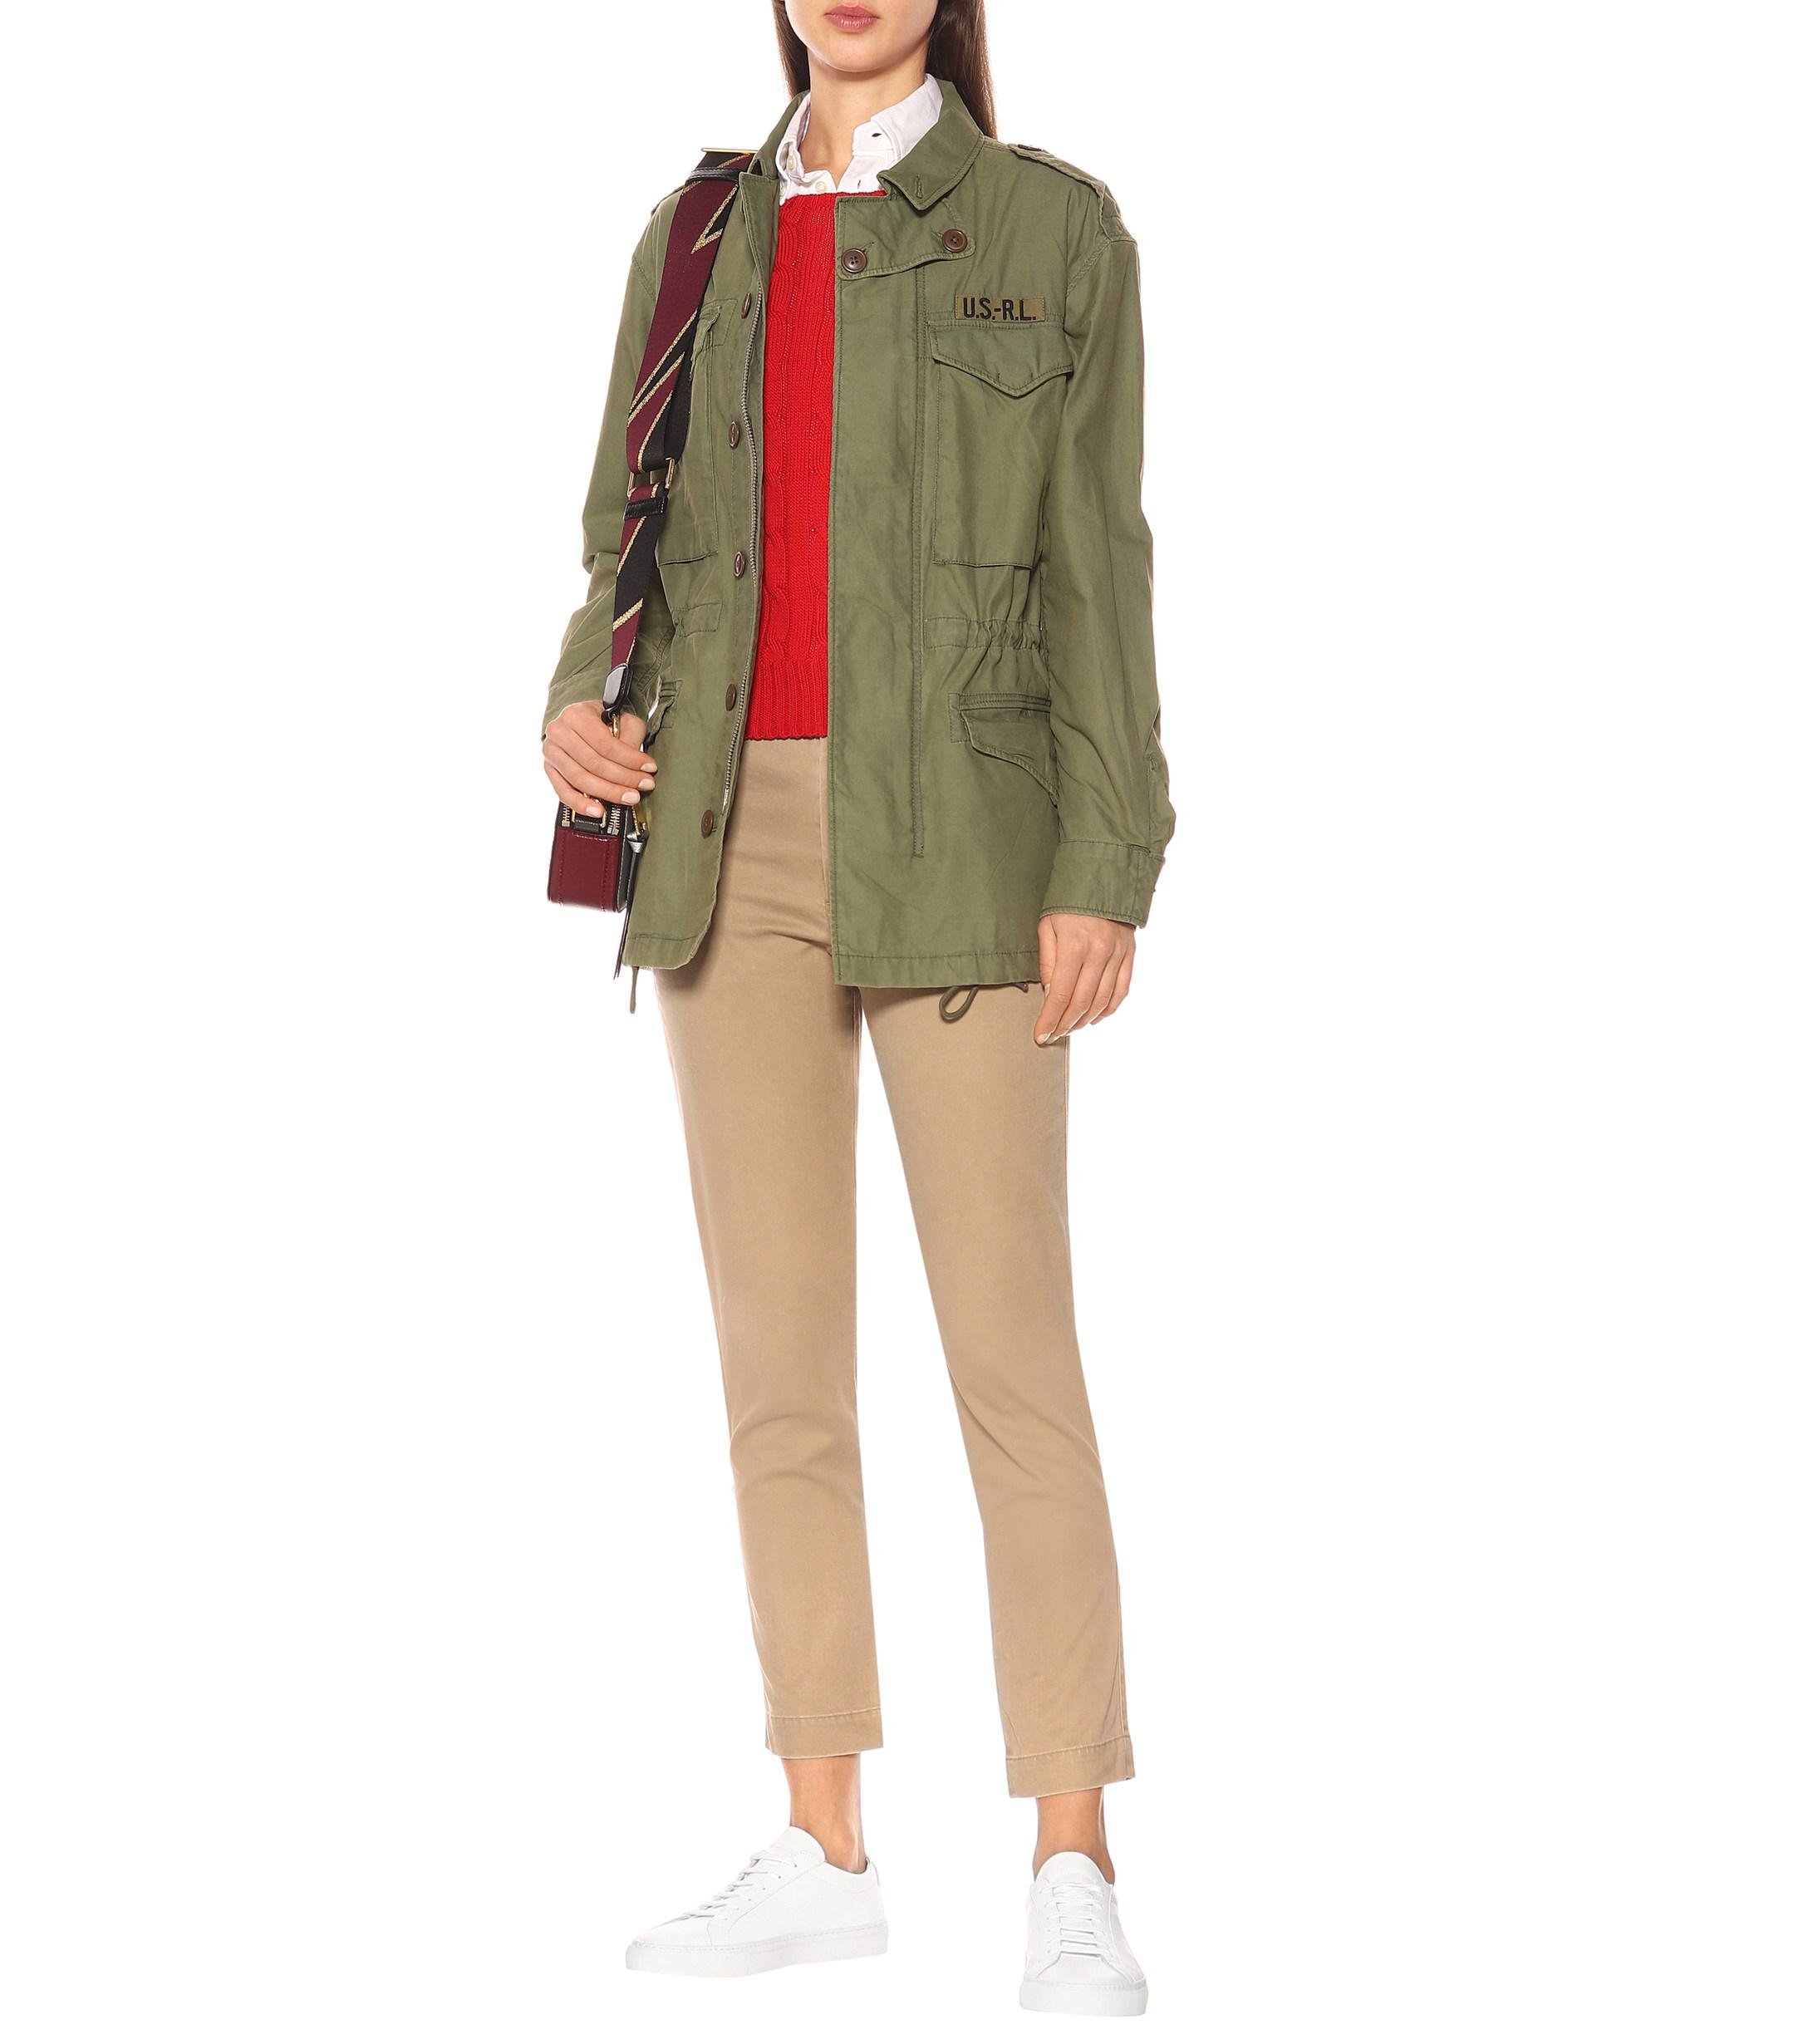 Polo Ralph Lauren Cotton Twill Military Jacket in Army Green (Green) - Lyst